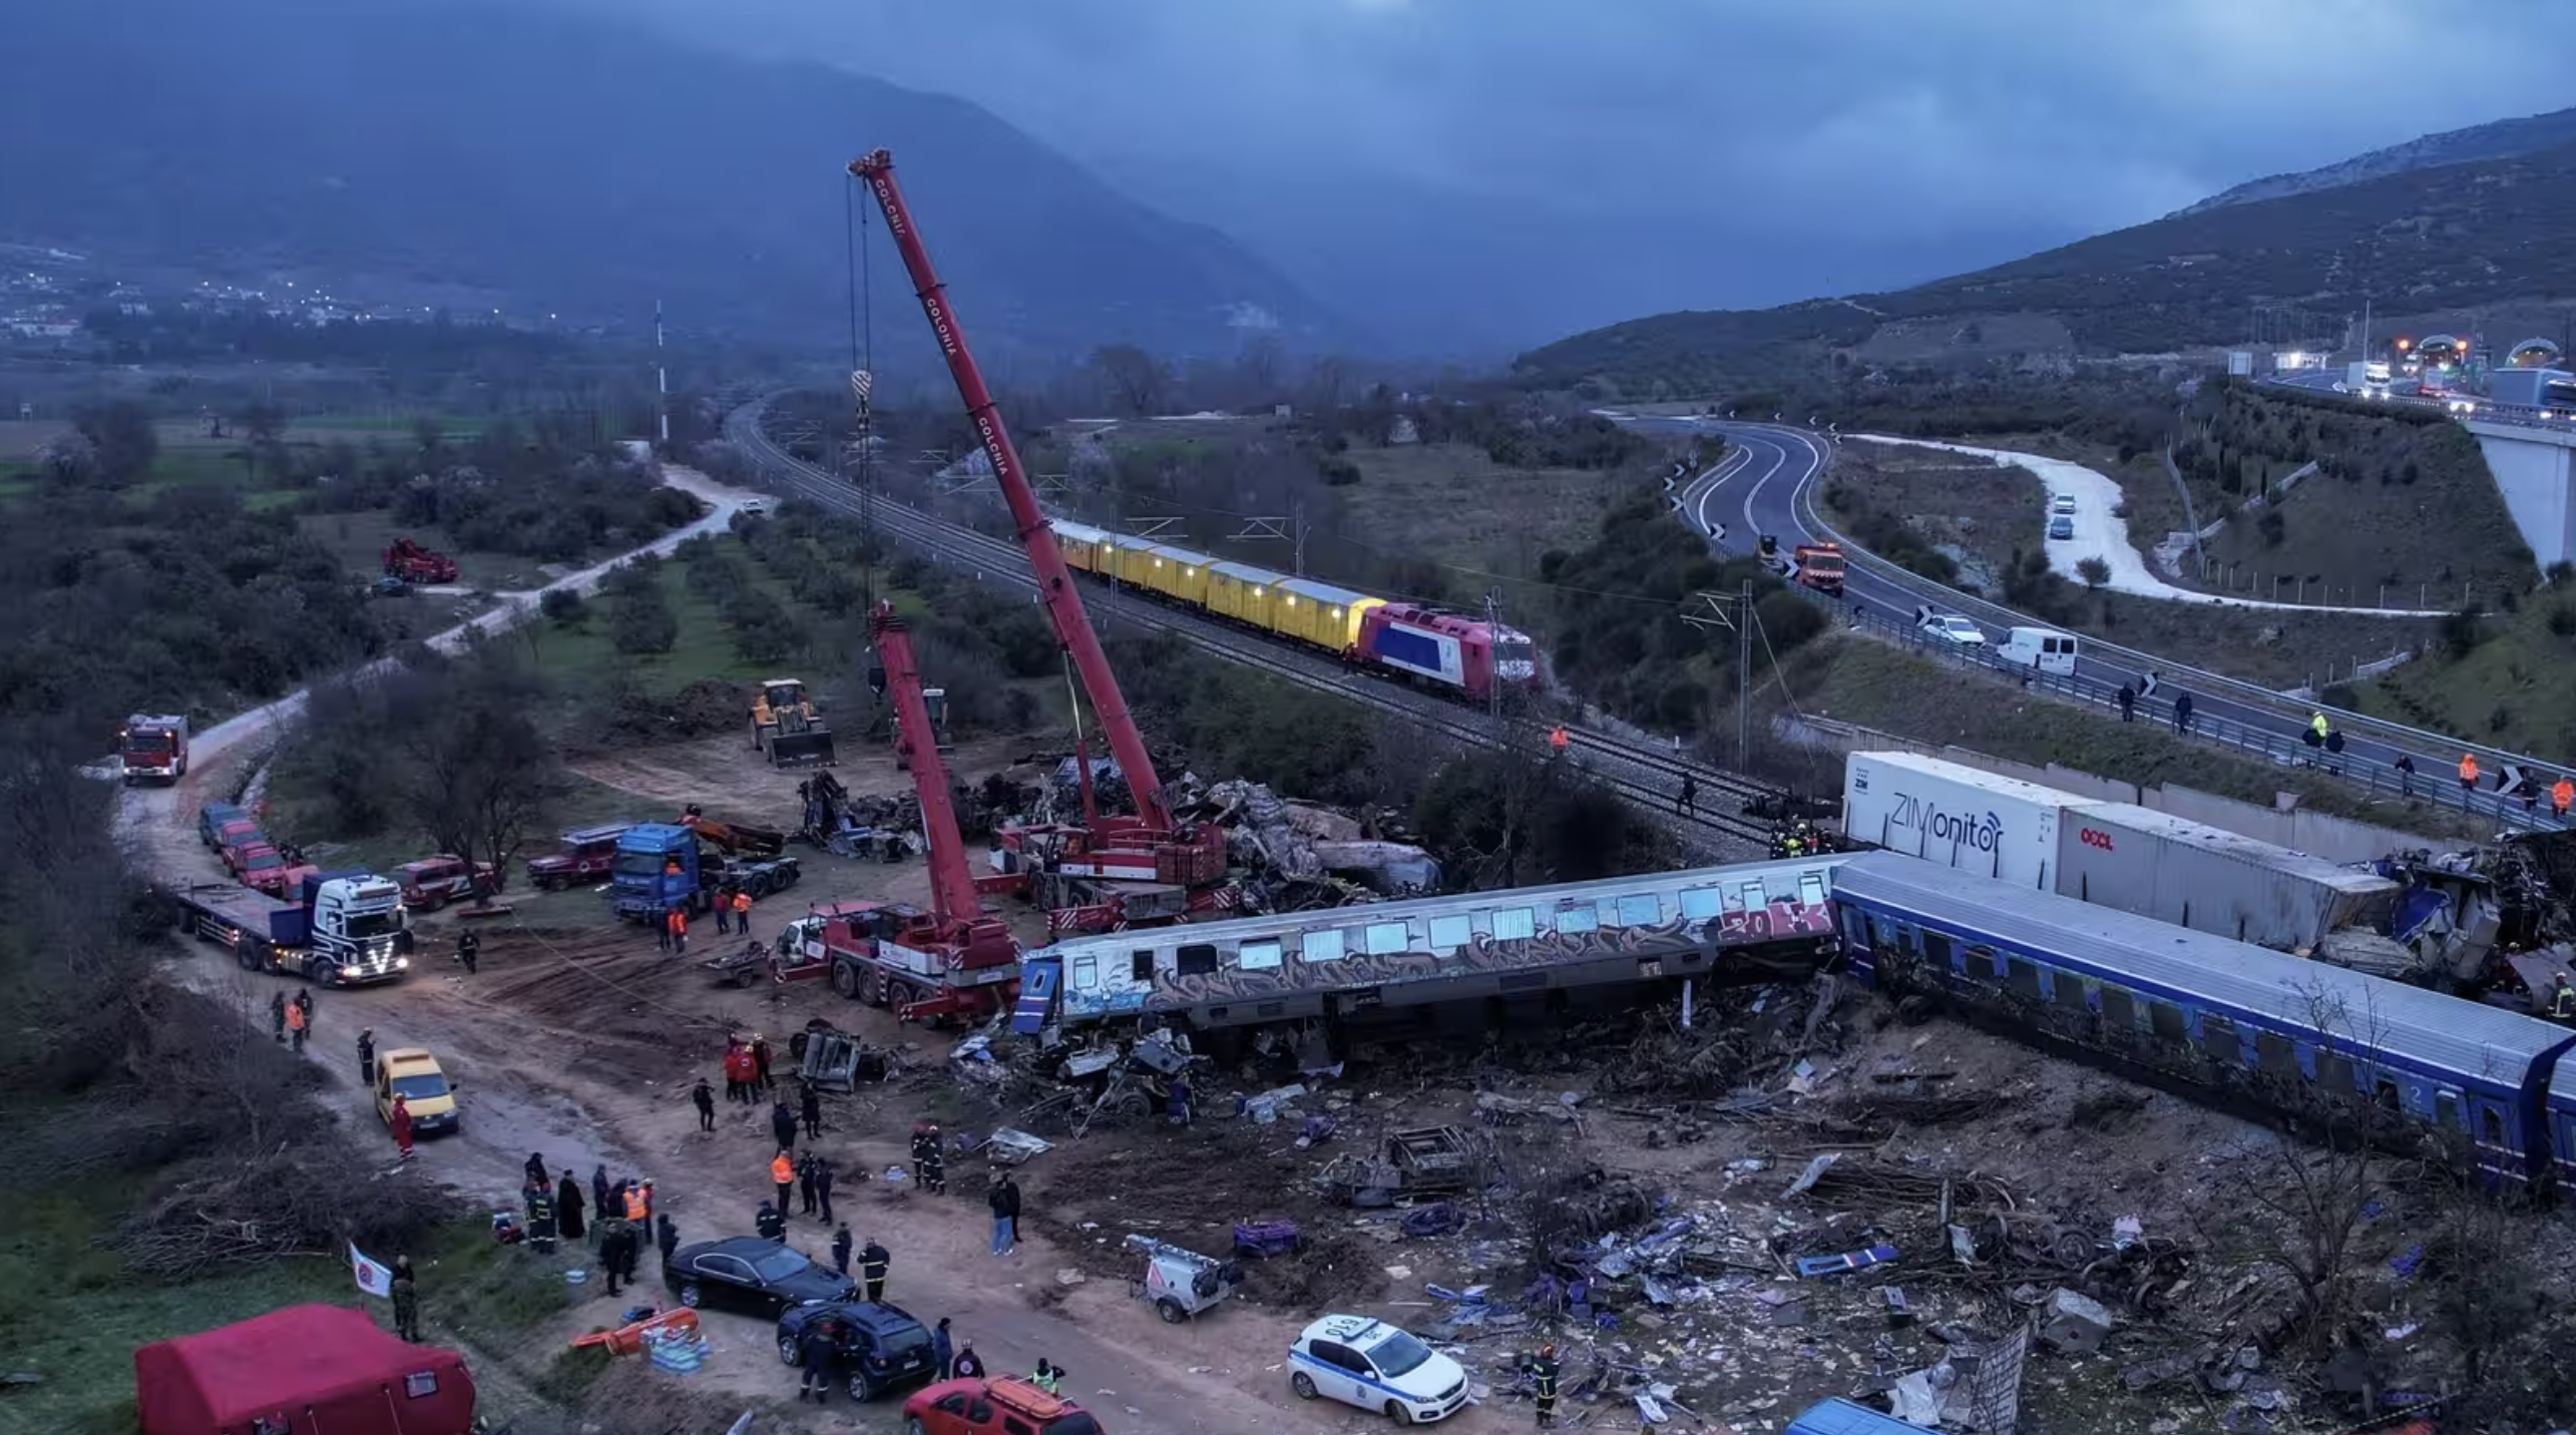 Greek Prime Minister Train accident was the result of human error